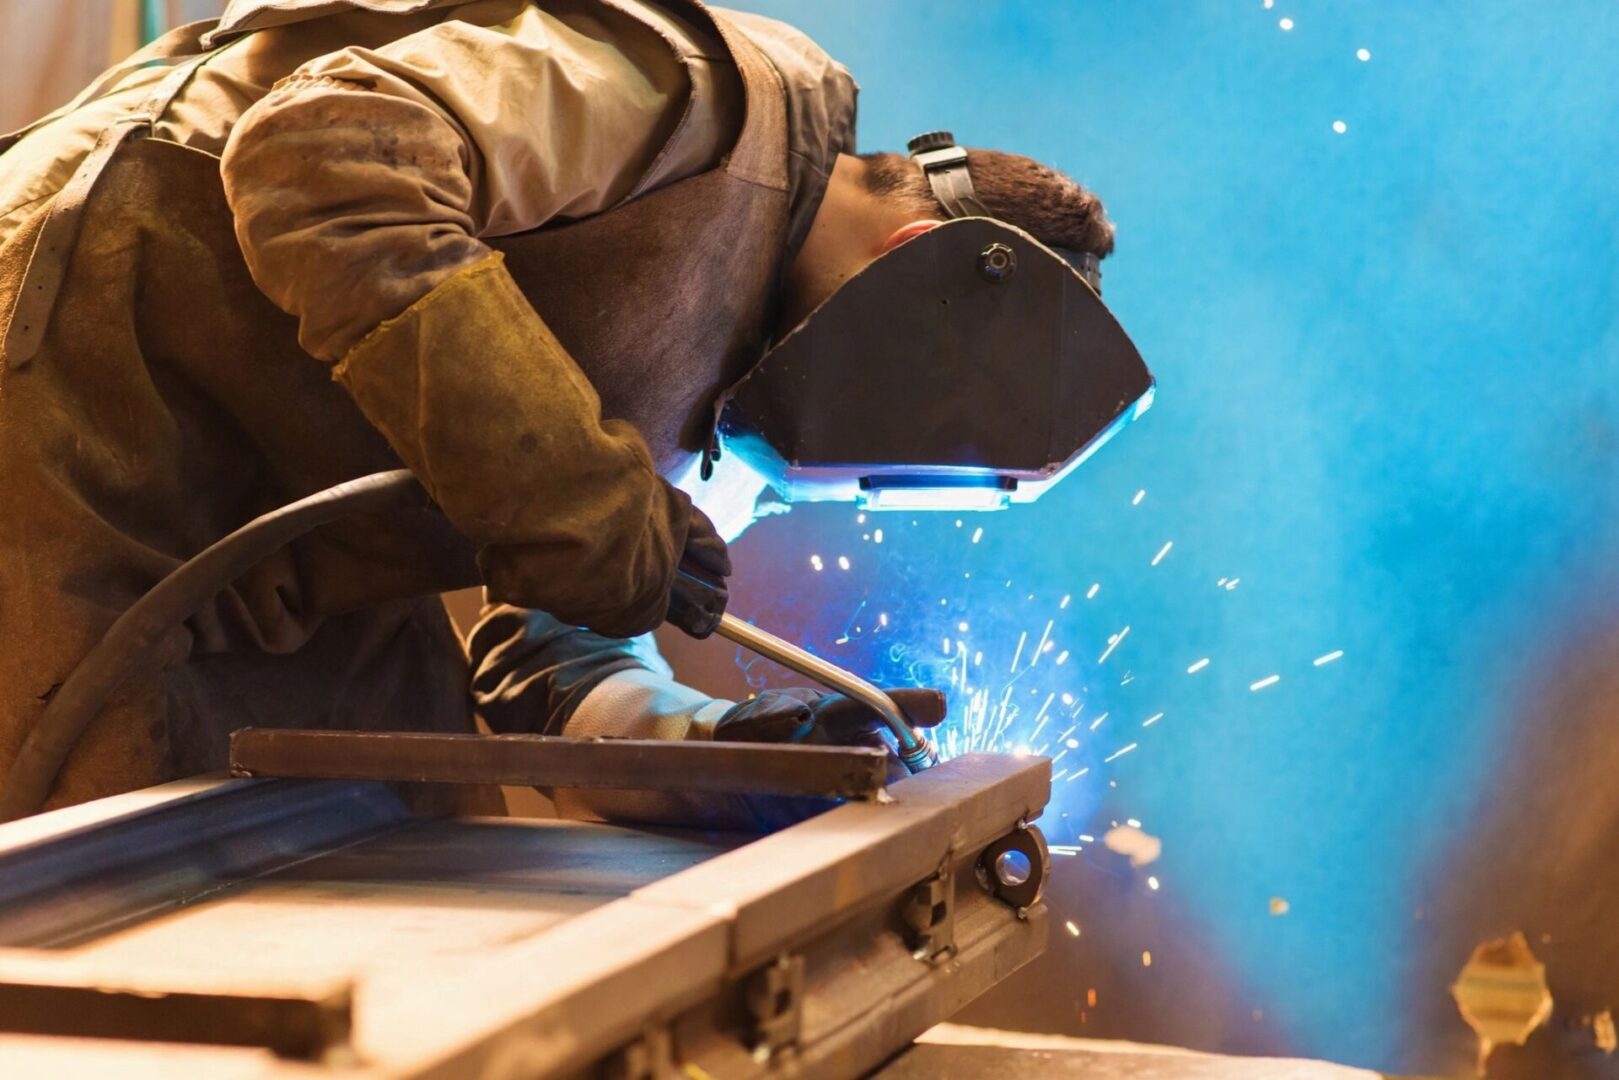 Young man welding in a facility while wearing a safety mask.